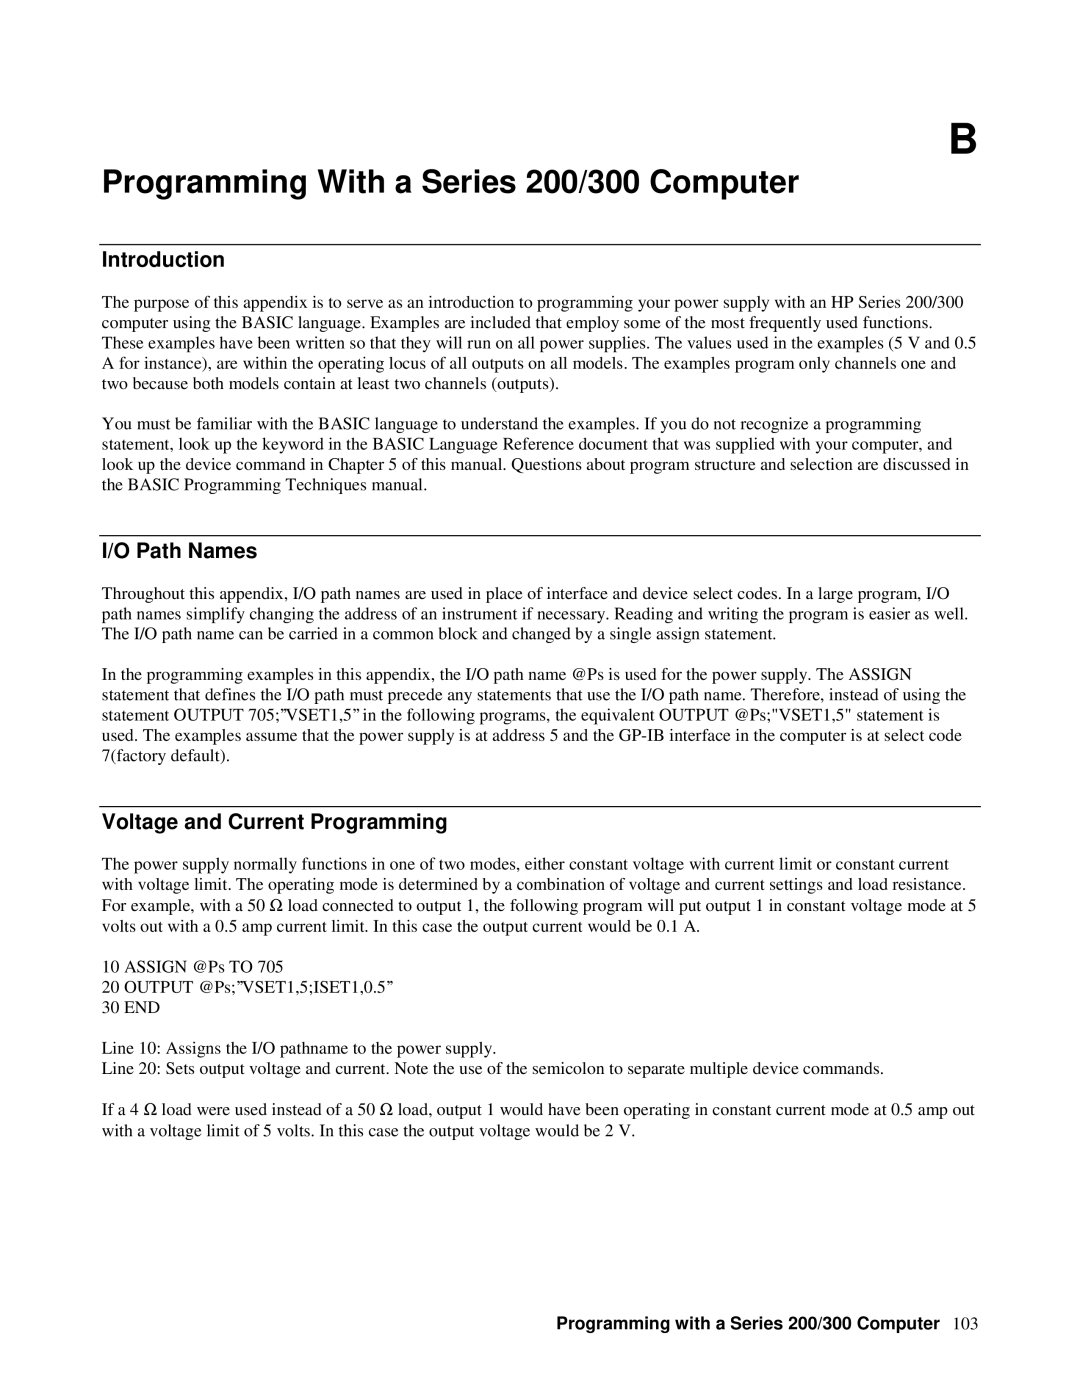 Agilent Technologies 6629A, 6626A Programming With a Series 200/300 Computer, Path Names, Voltage and Current Programming 